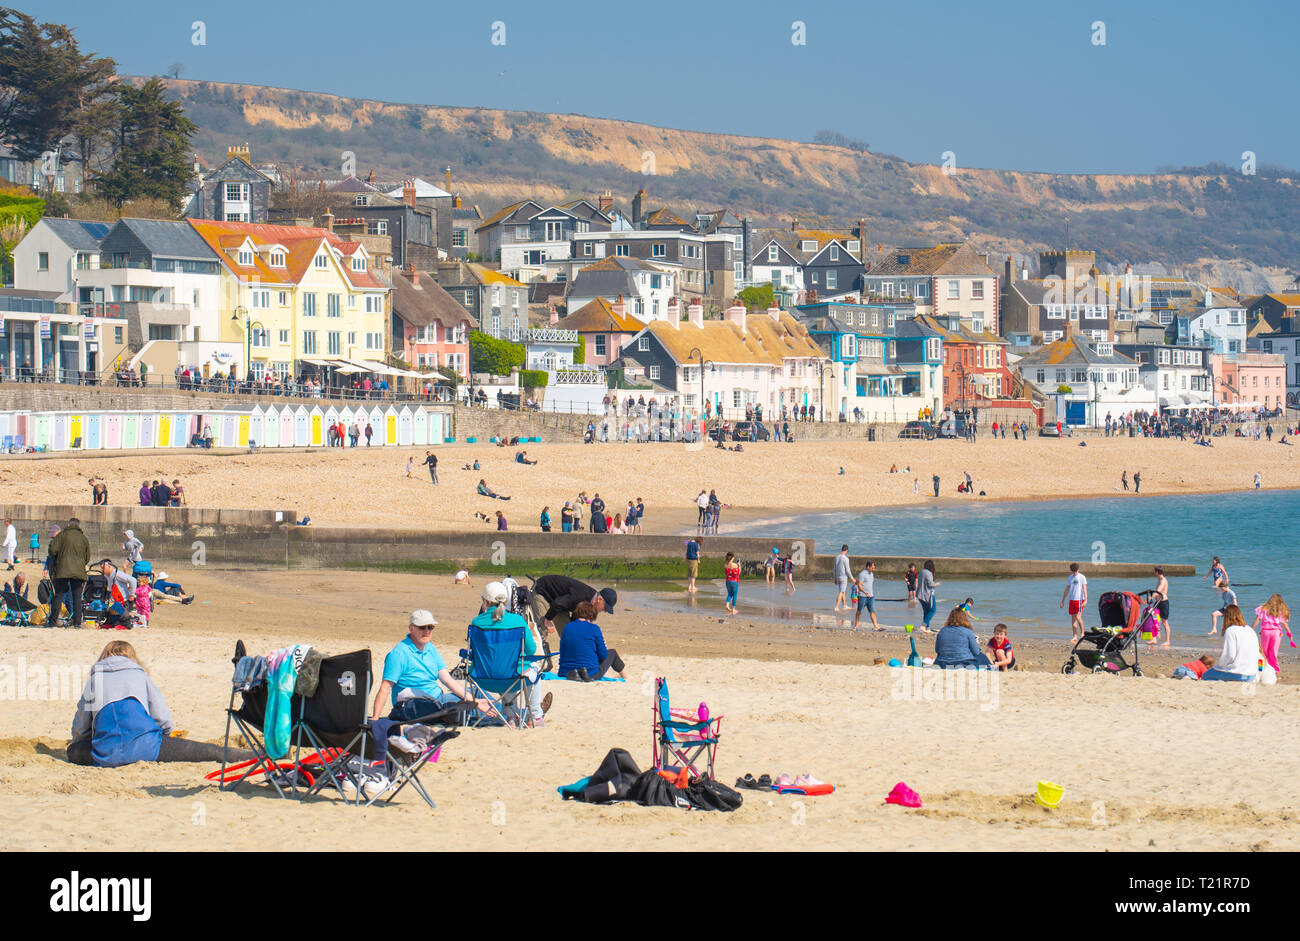 Lyme Regis, Dorset, UK. 24th March 2019. UK Weather: Weekend visitors flock to the picturesque seaside town of Lyme Regis to bask in hot sunshine as temperatures soar to 18 degree celsius in the spring heatwave.  Cooler conditions are forecast for Sunday.  Credit: Celia McMahon/Alamy Live News Stock Photo